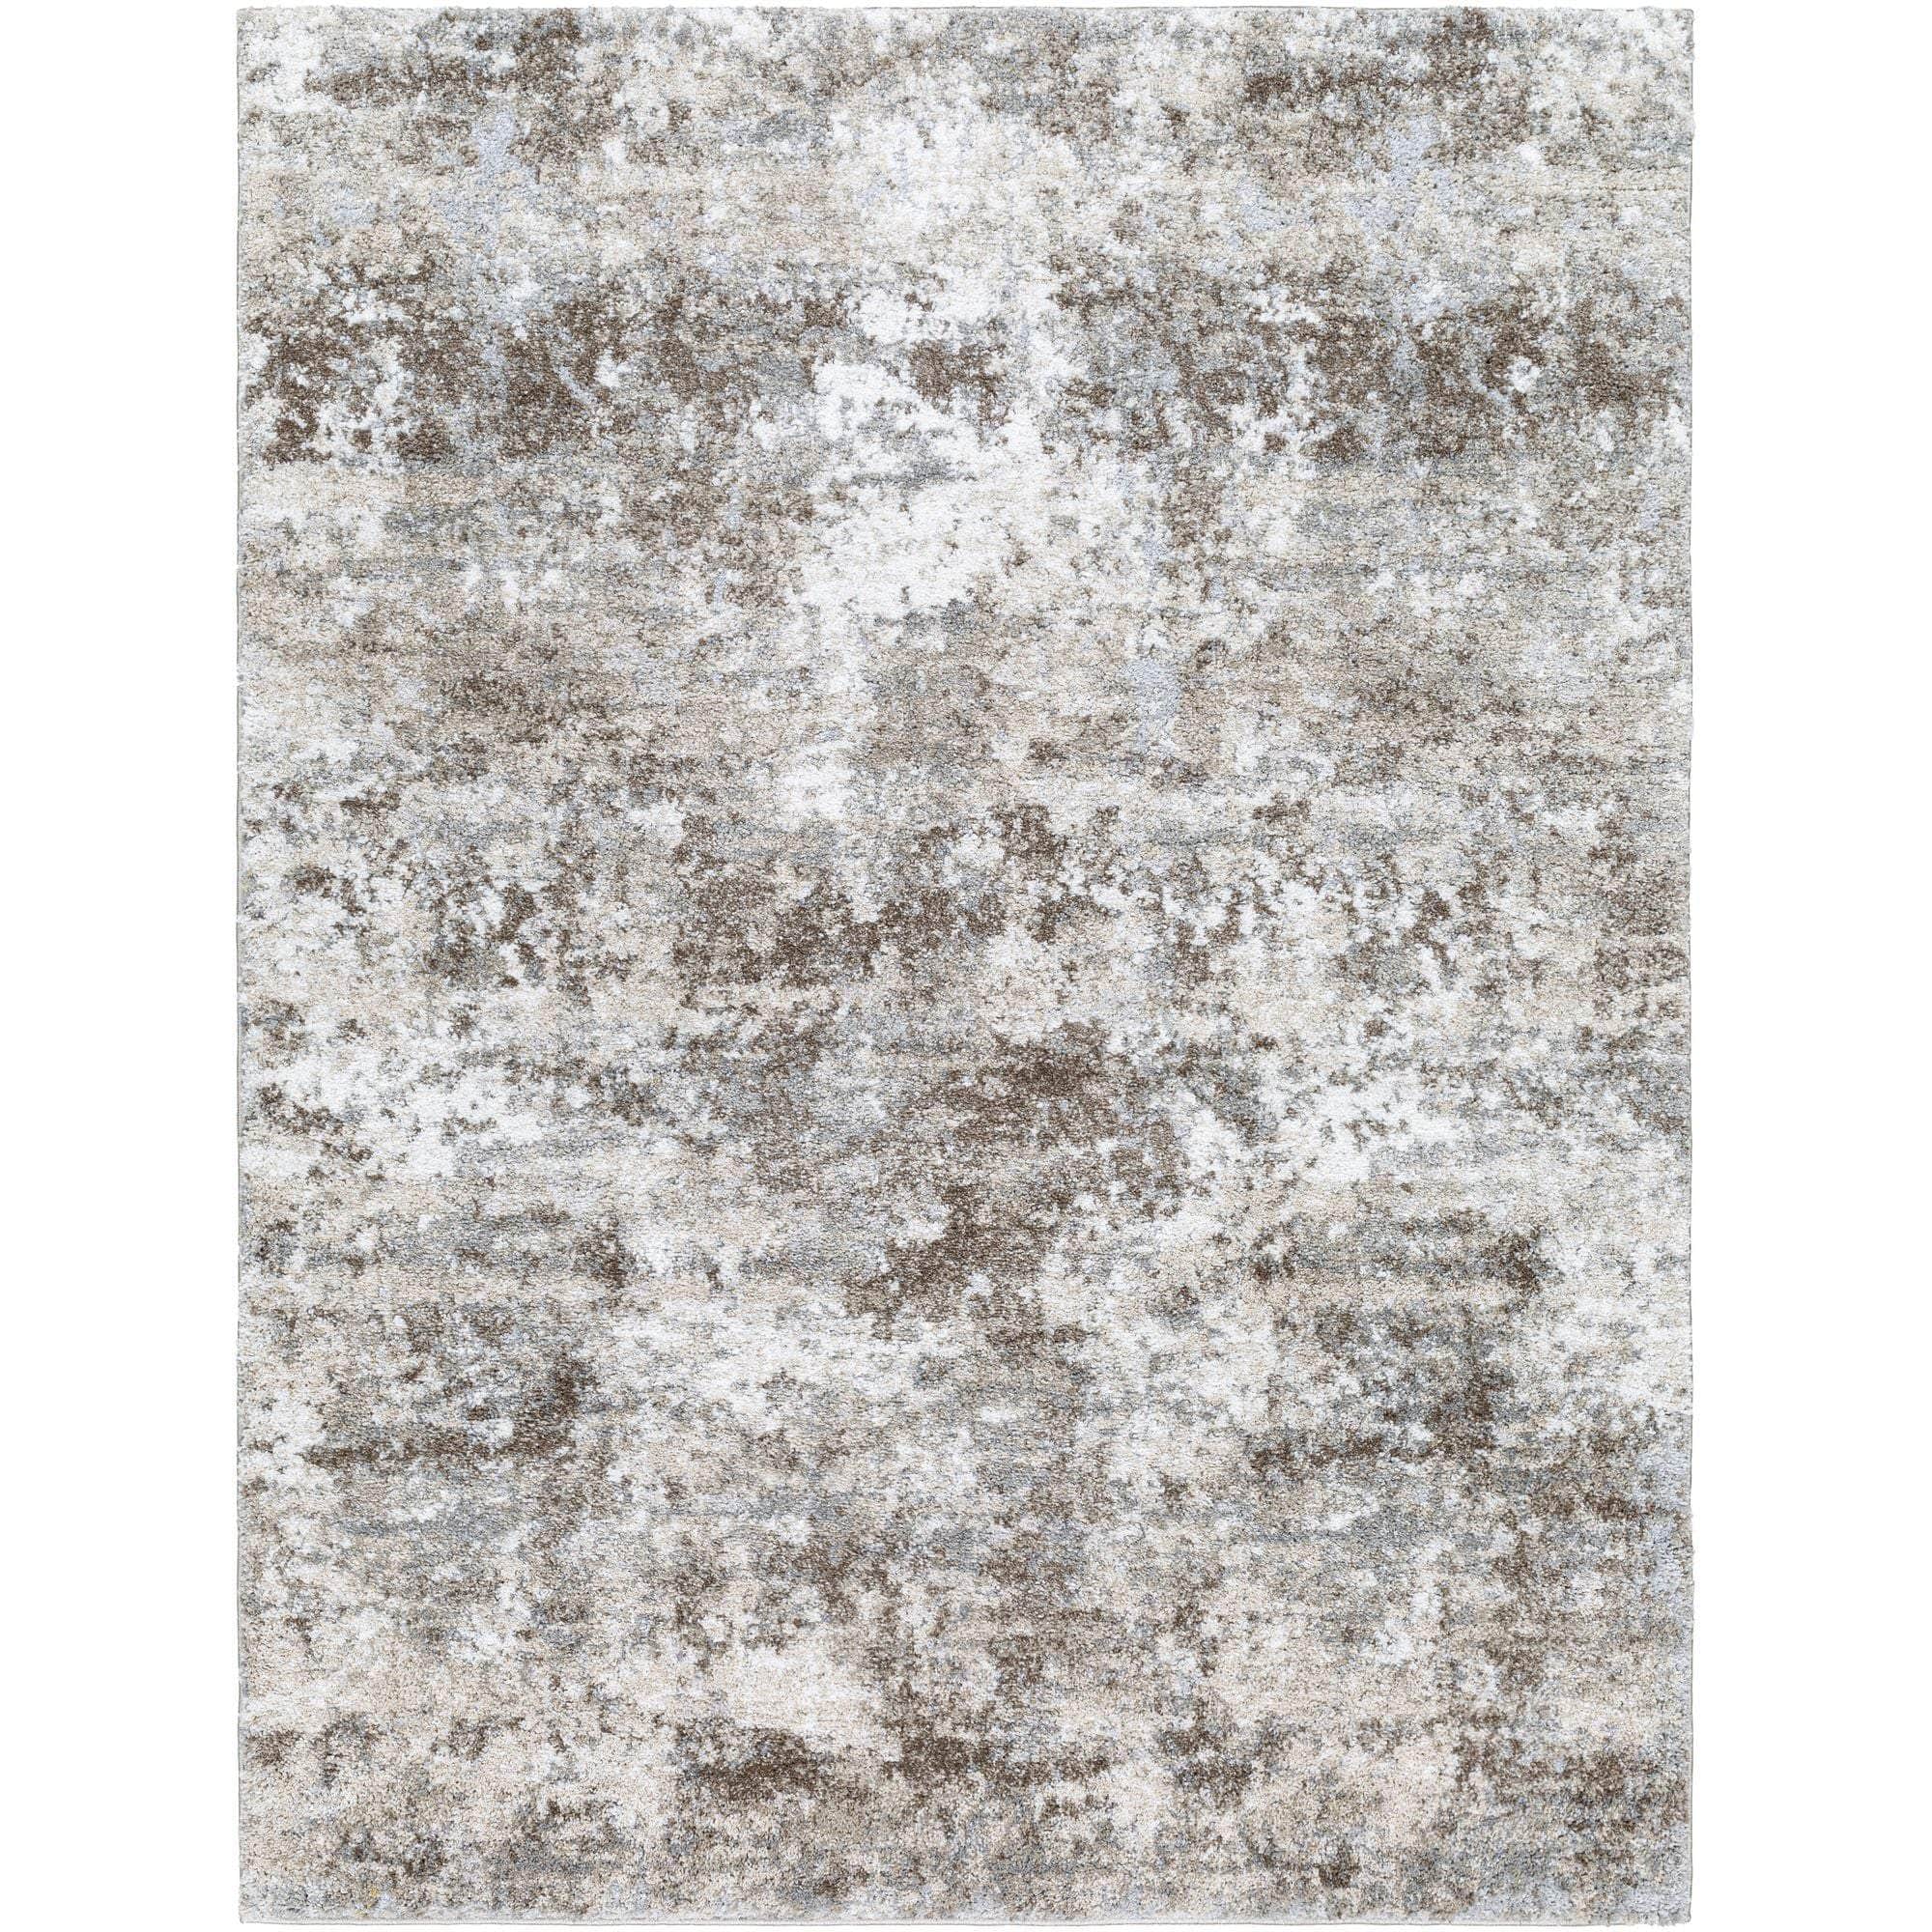 Machine Woven PTF-2319 Slate, Silver, Metallic - Silver, Sterling Grey, Sage Rugs #color_slate, silver, metallic - silver, sterling grey, sage